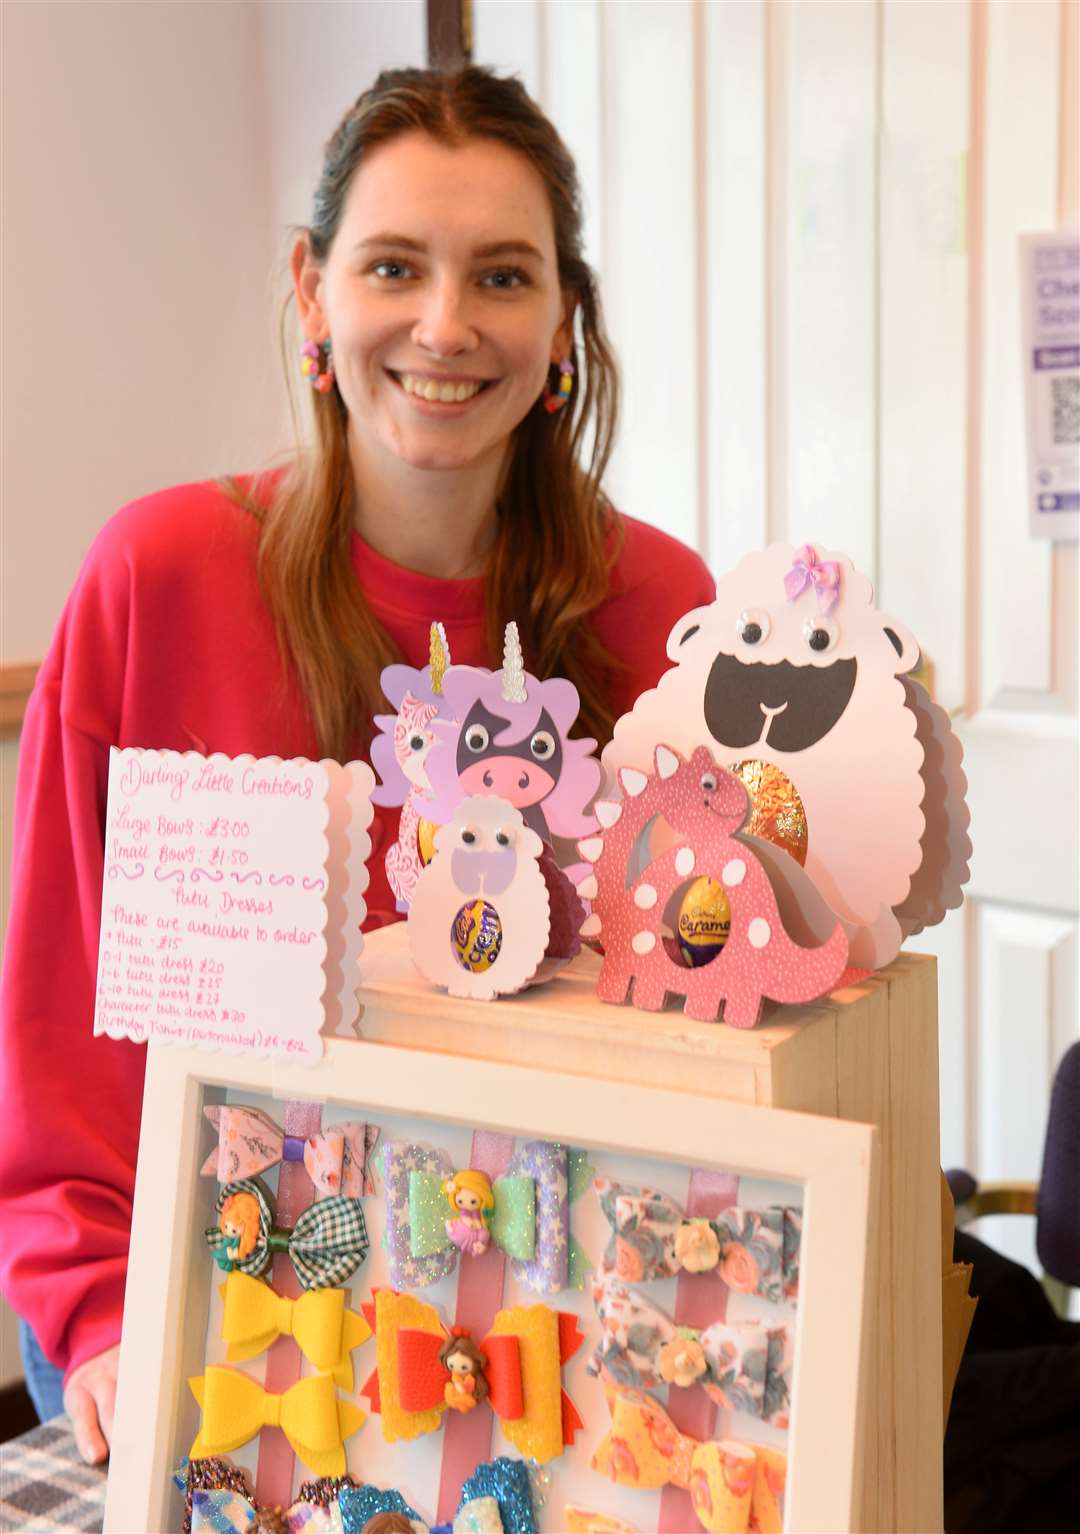 Caitlin Stroud on her Darling Little Creations stall.